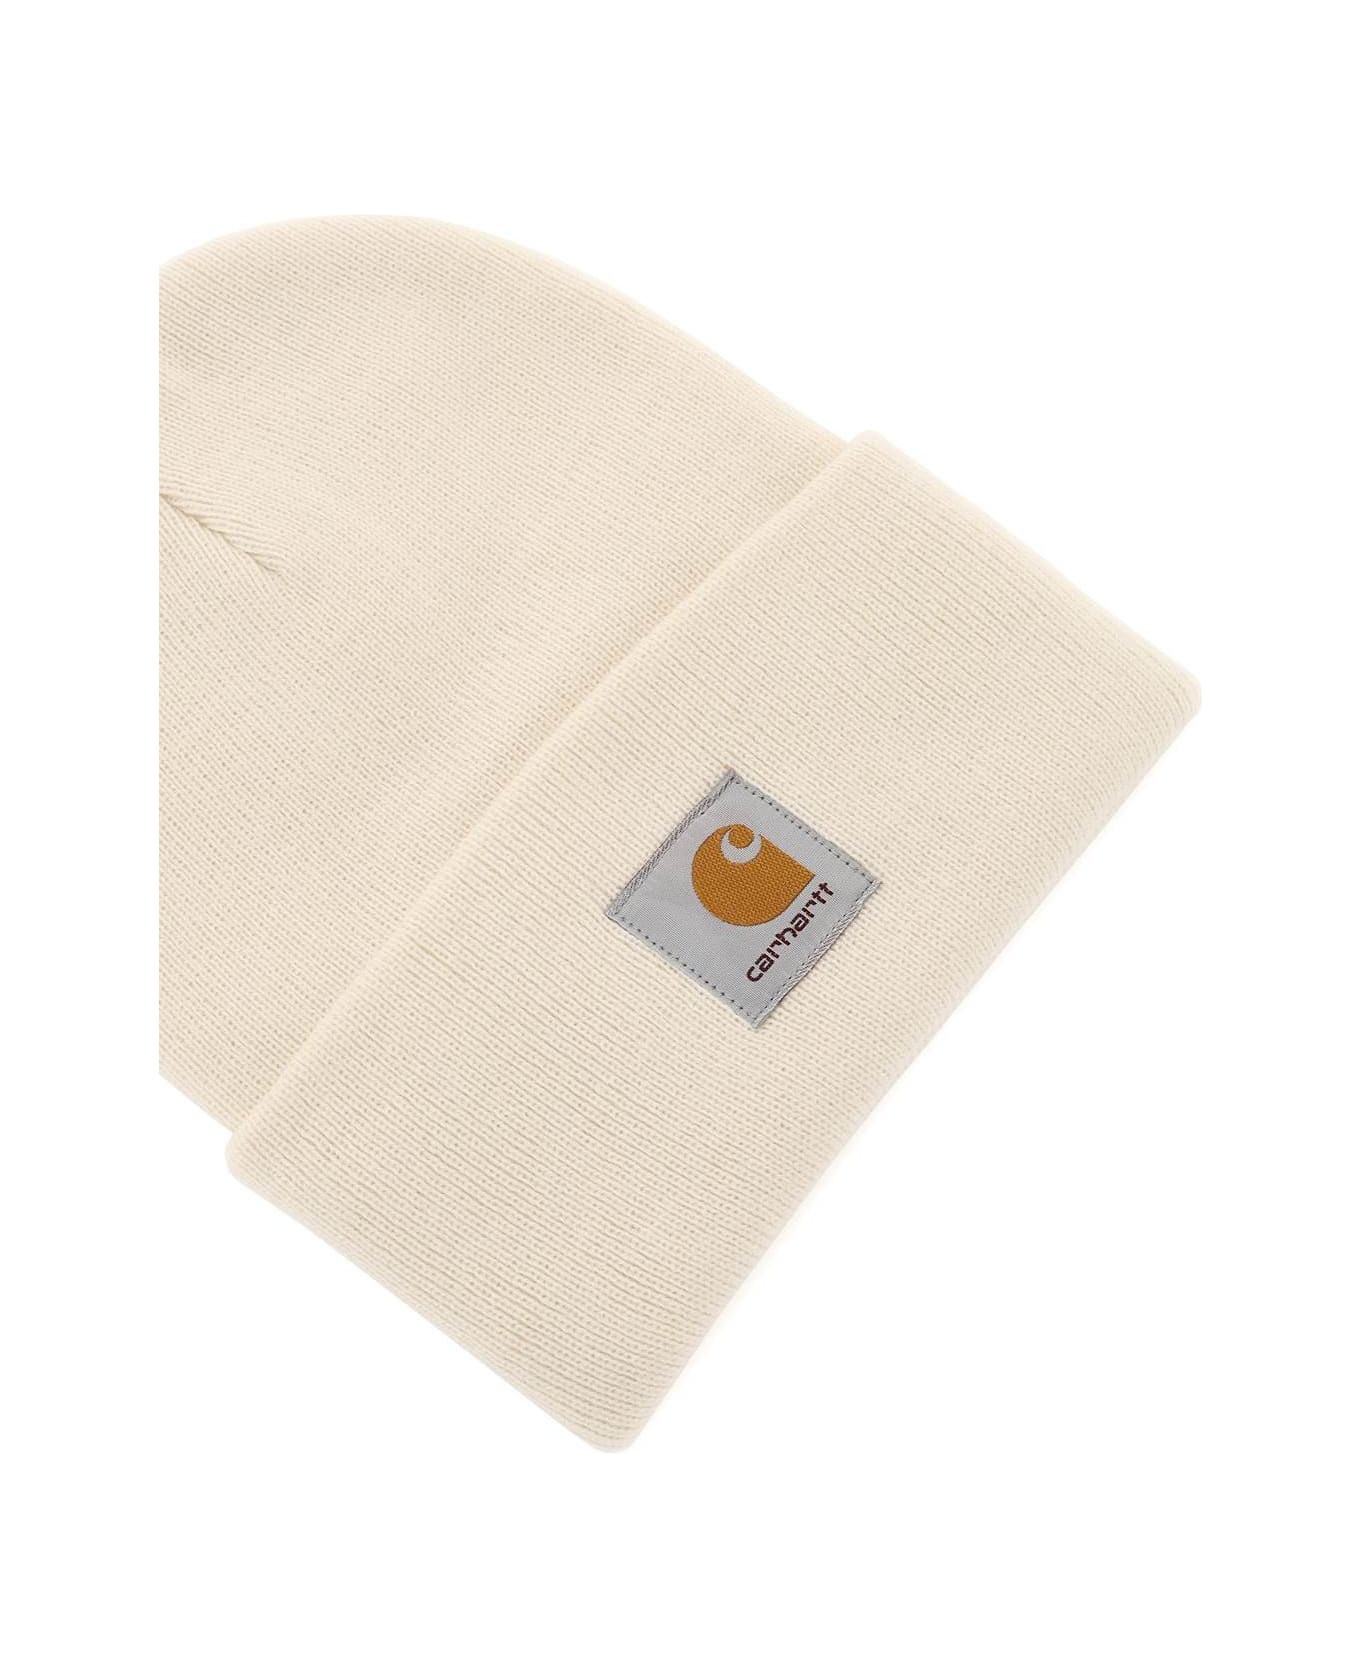 Carhartt Beanie Hat With Logo Patch - Natural